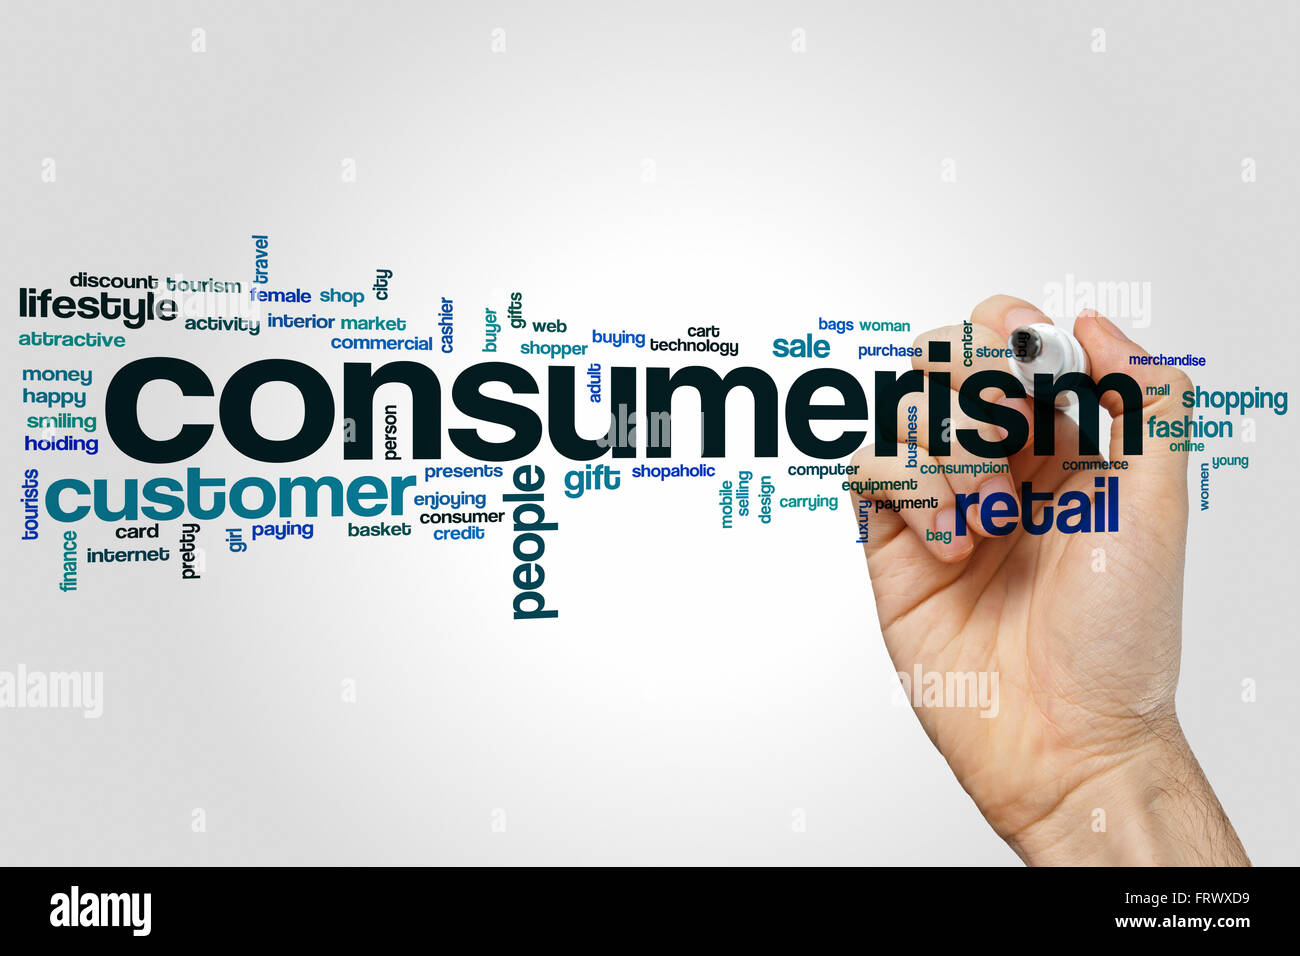 Consumerism word cloud concept with retail store related tags Stock Photo